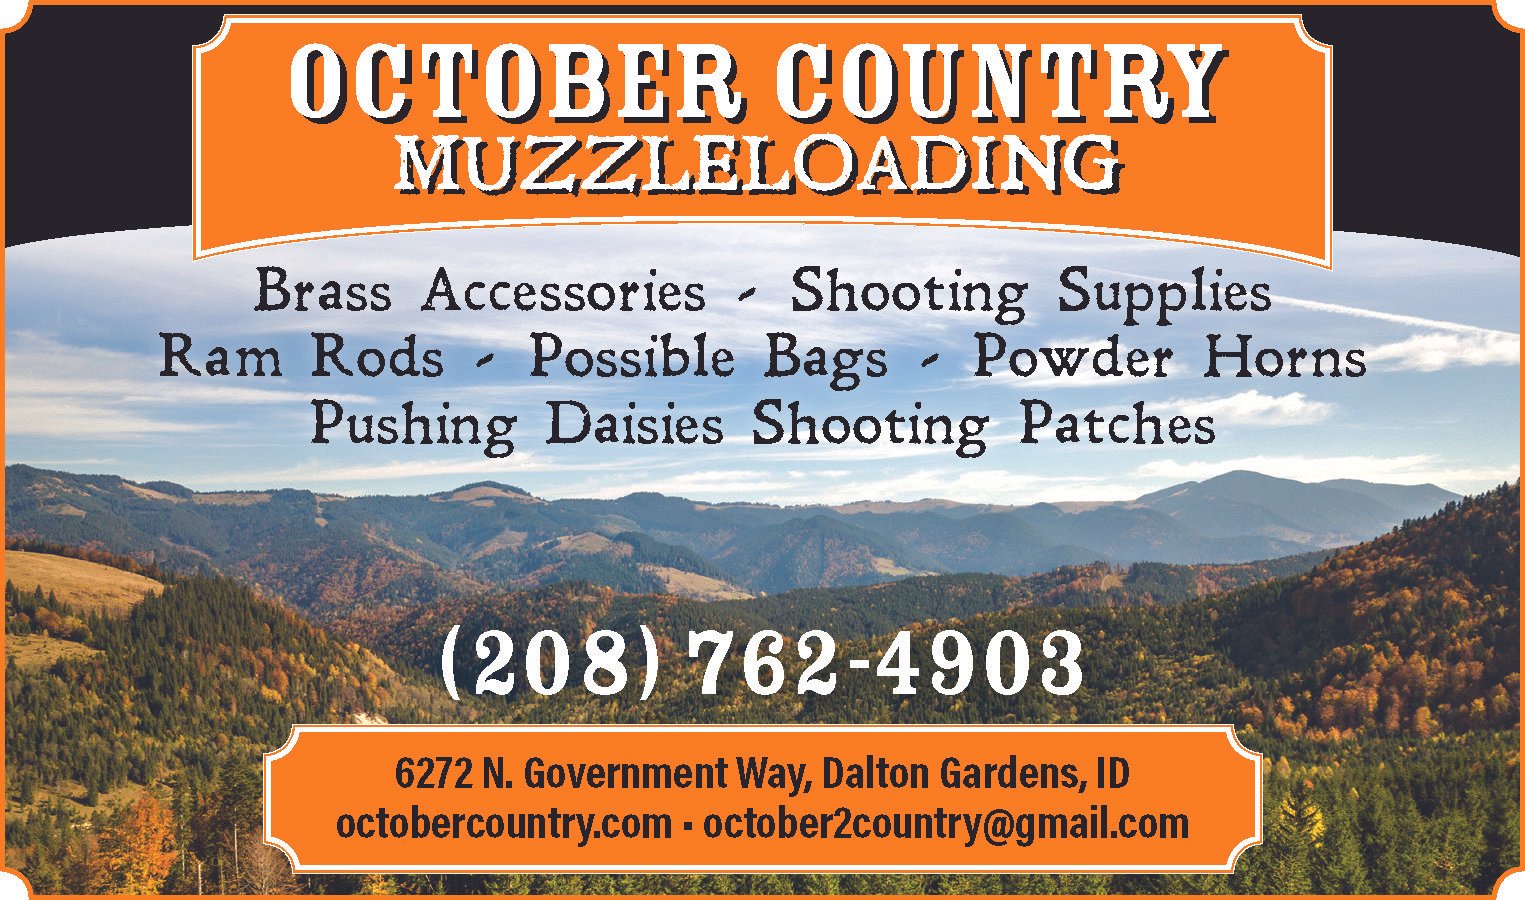 October Country Muzzleloading